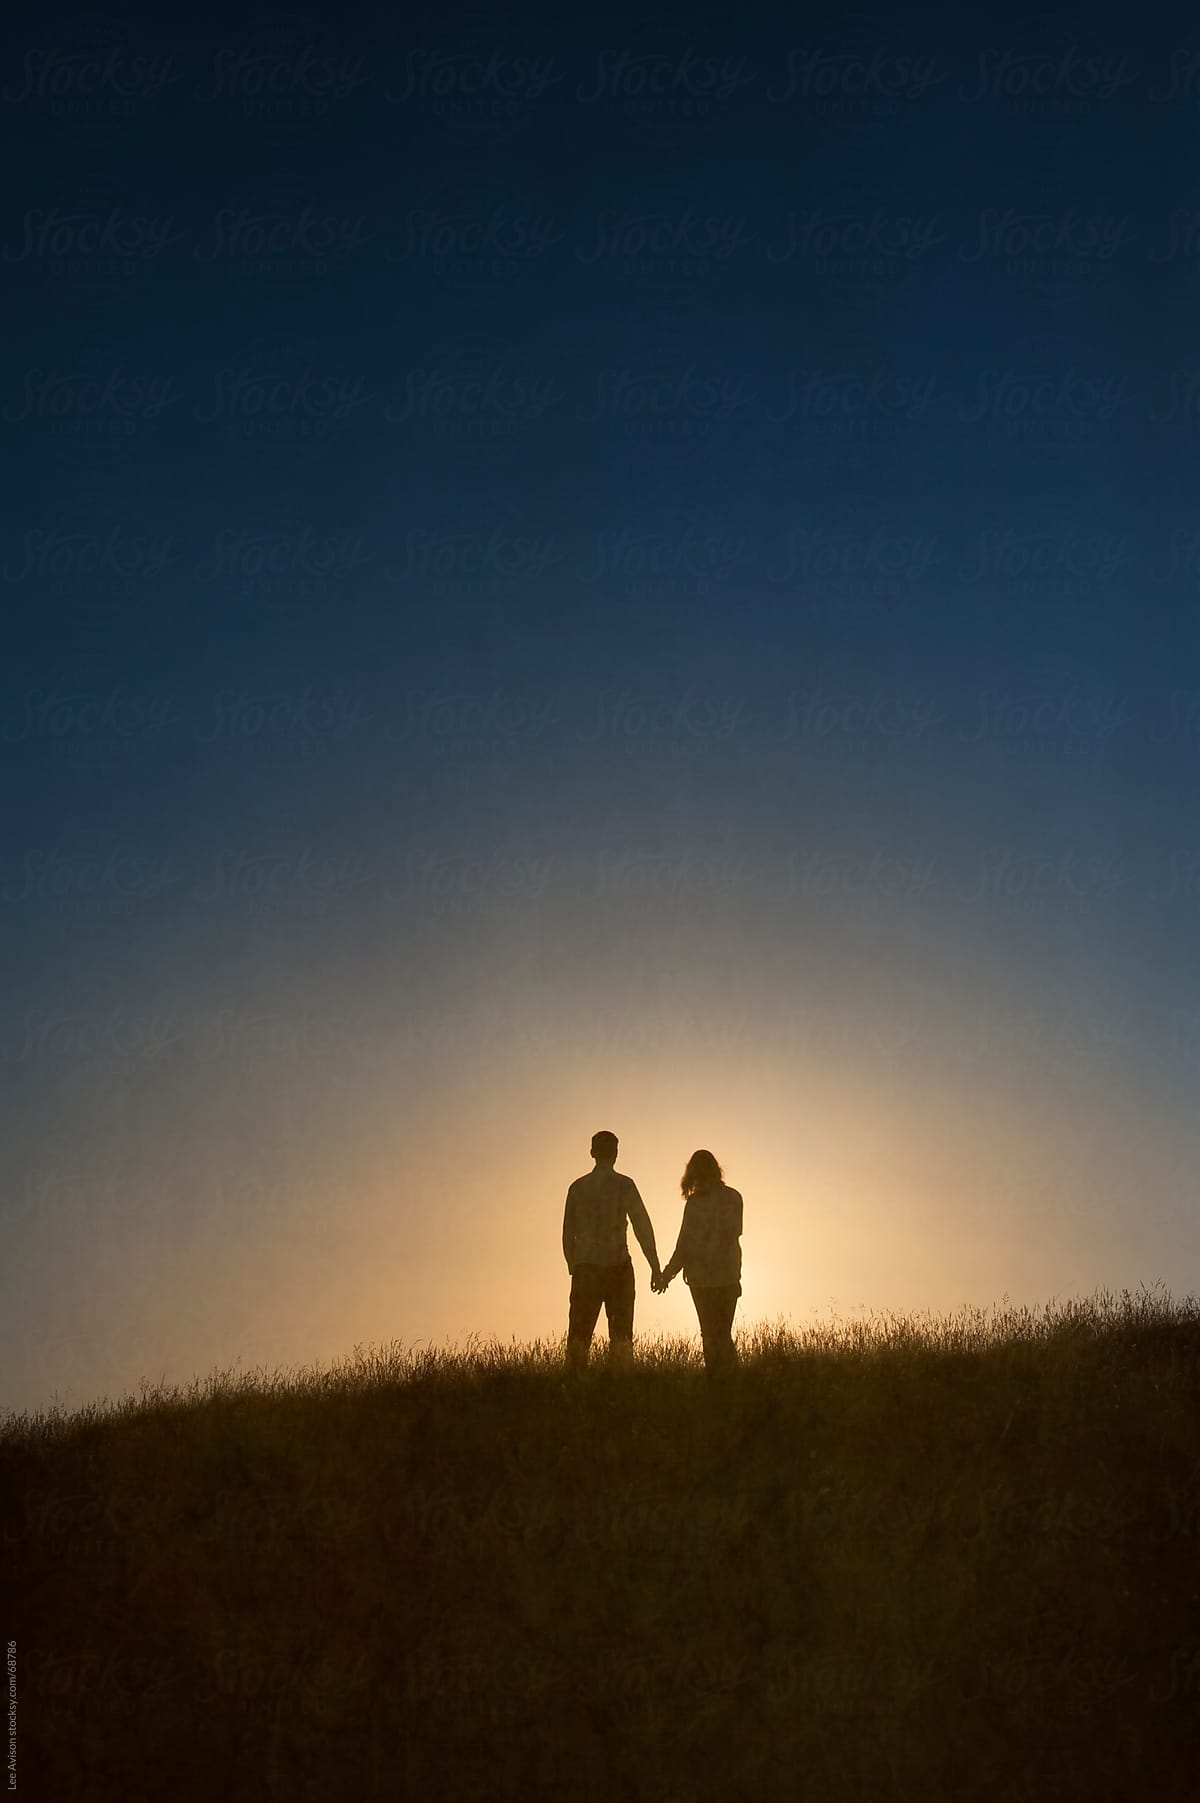 &Quot;Couple Holding Hands At Sunset&Quot; By Stocksy Contributor &Quot;Lee Avison